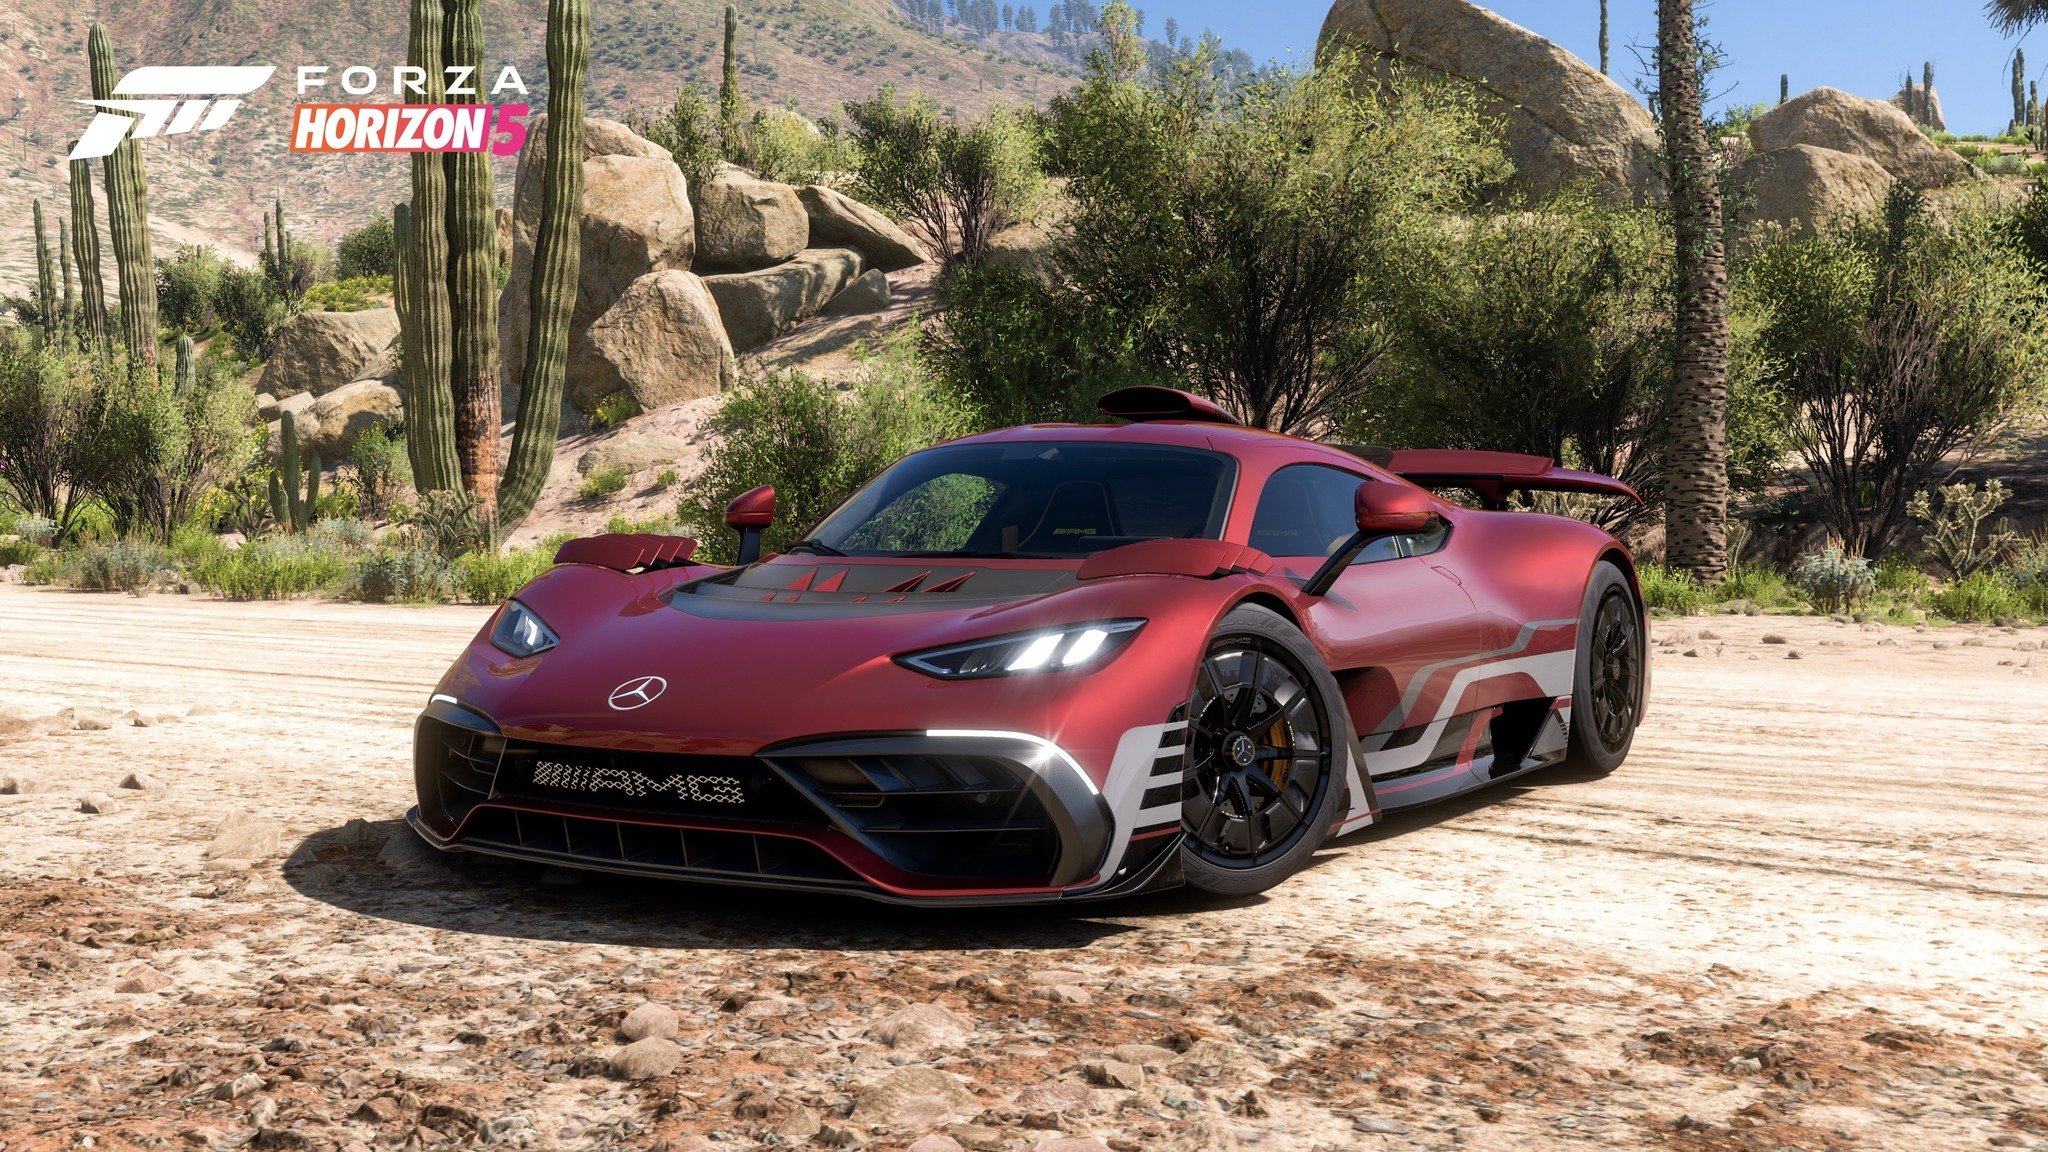 The next Forza Horizon 5 update will include brand-new German vehicles, The Gamers Dreams, thegamersdreams.com